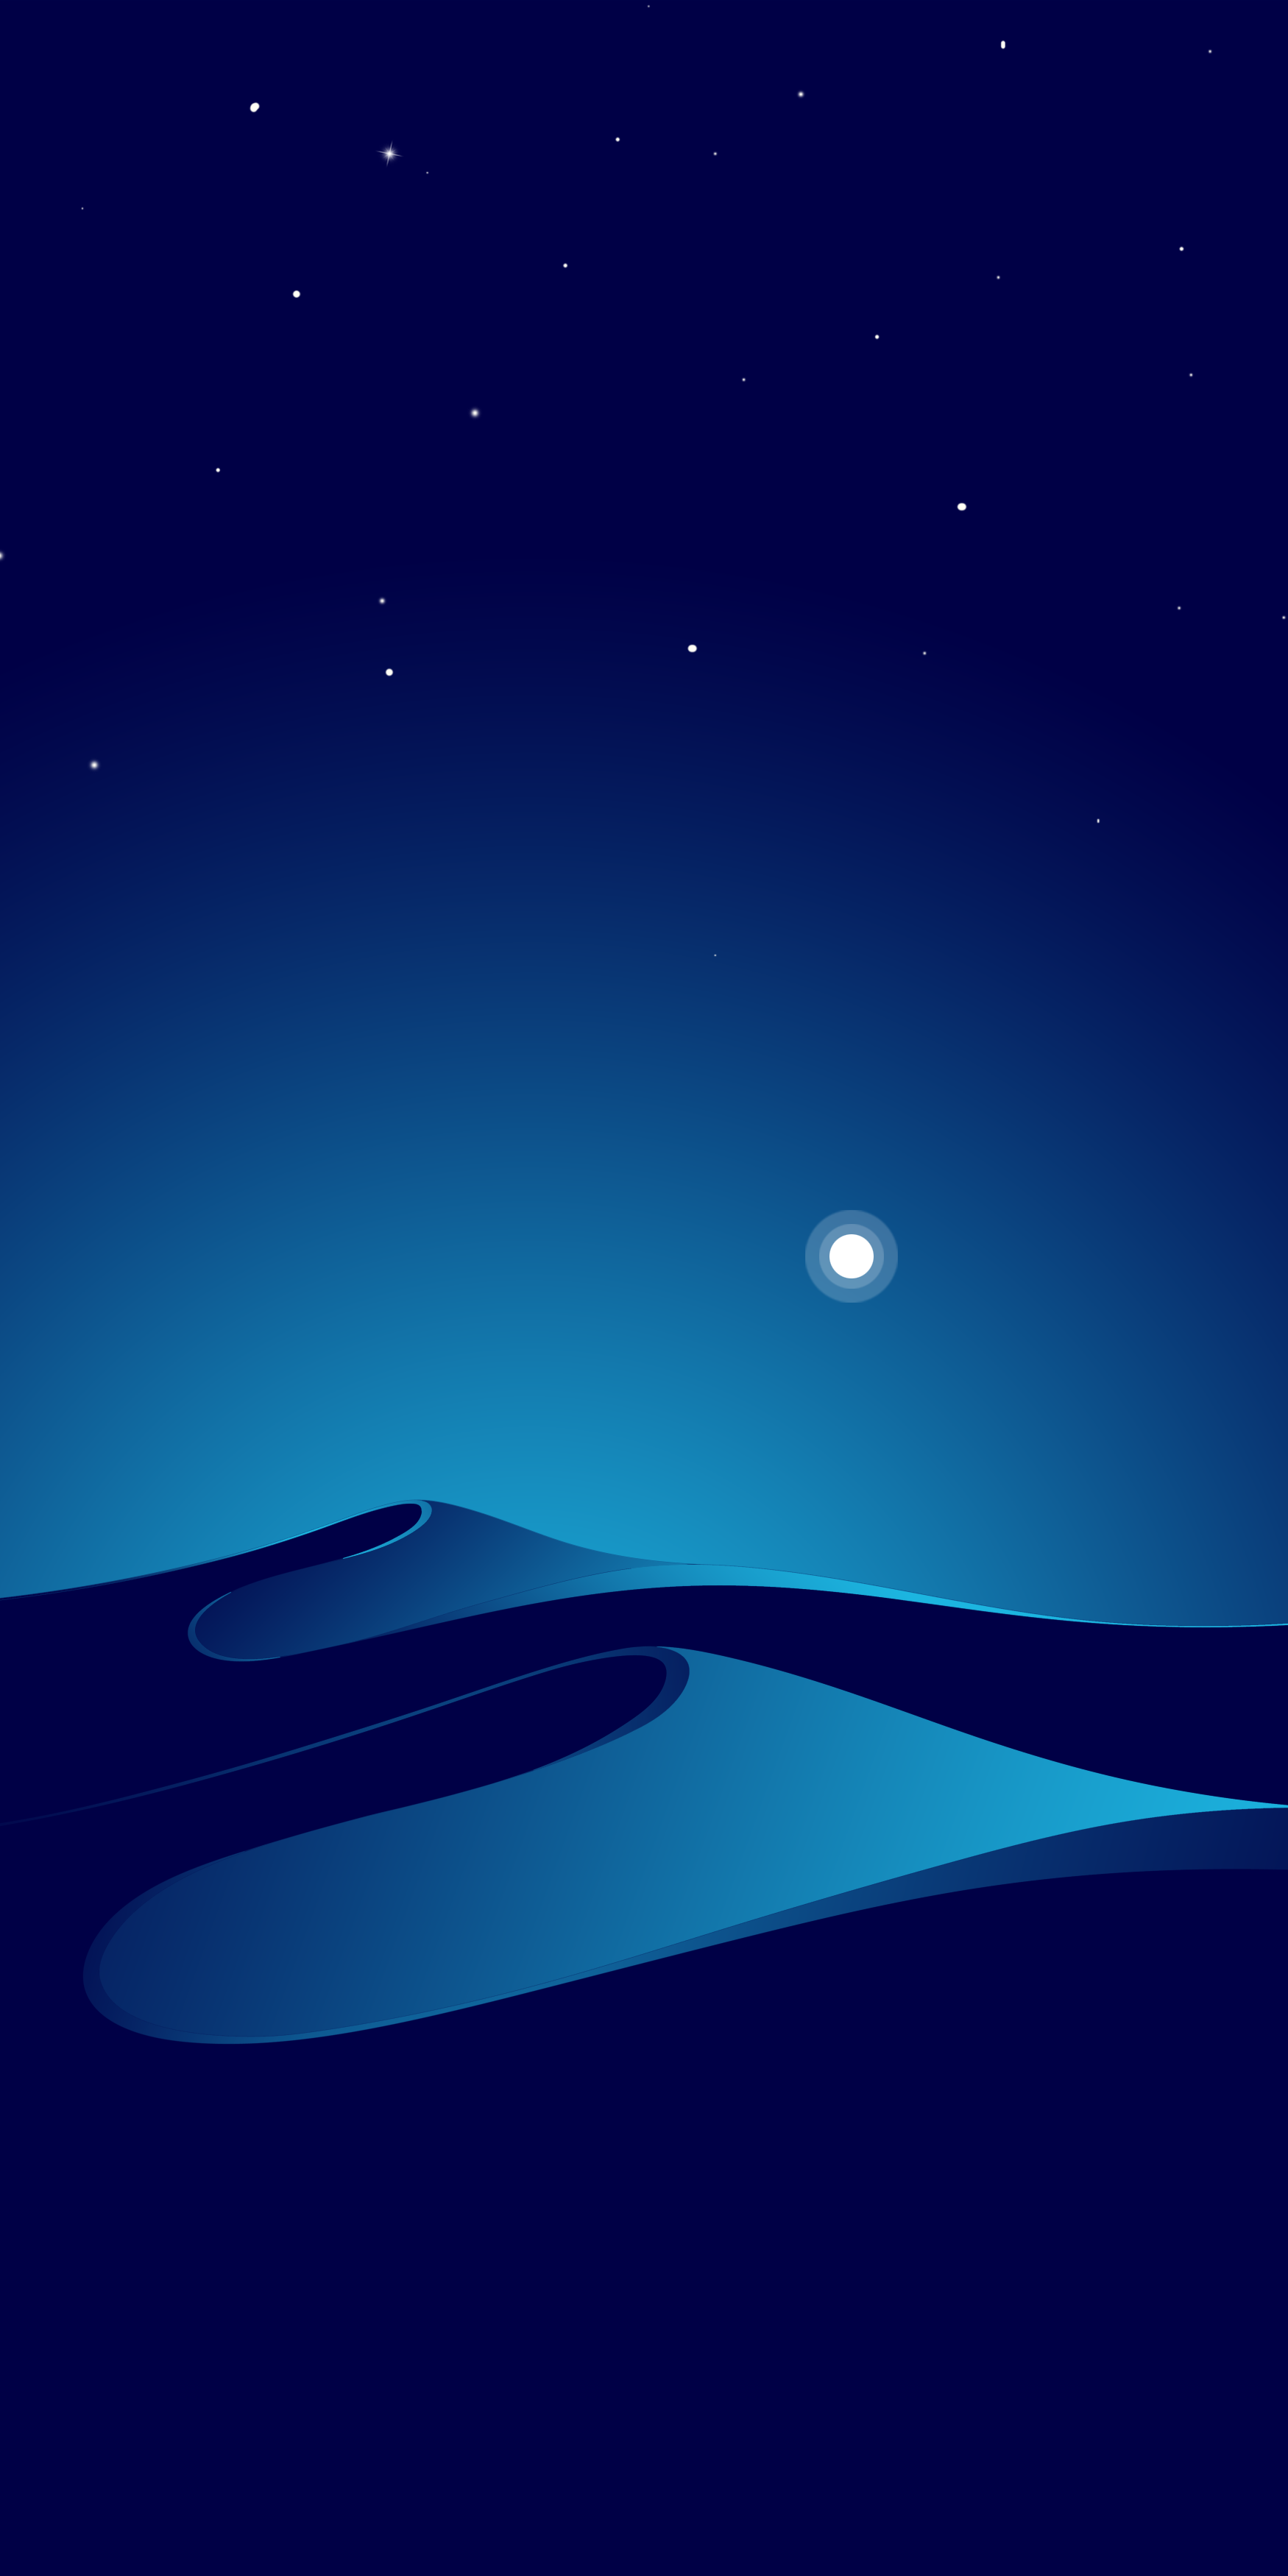 99] Punch Hole Wallpapers for Samsung Galaxy S20 S20 Ultra in